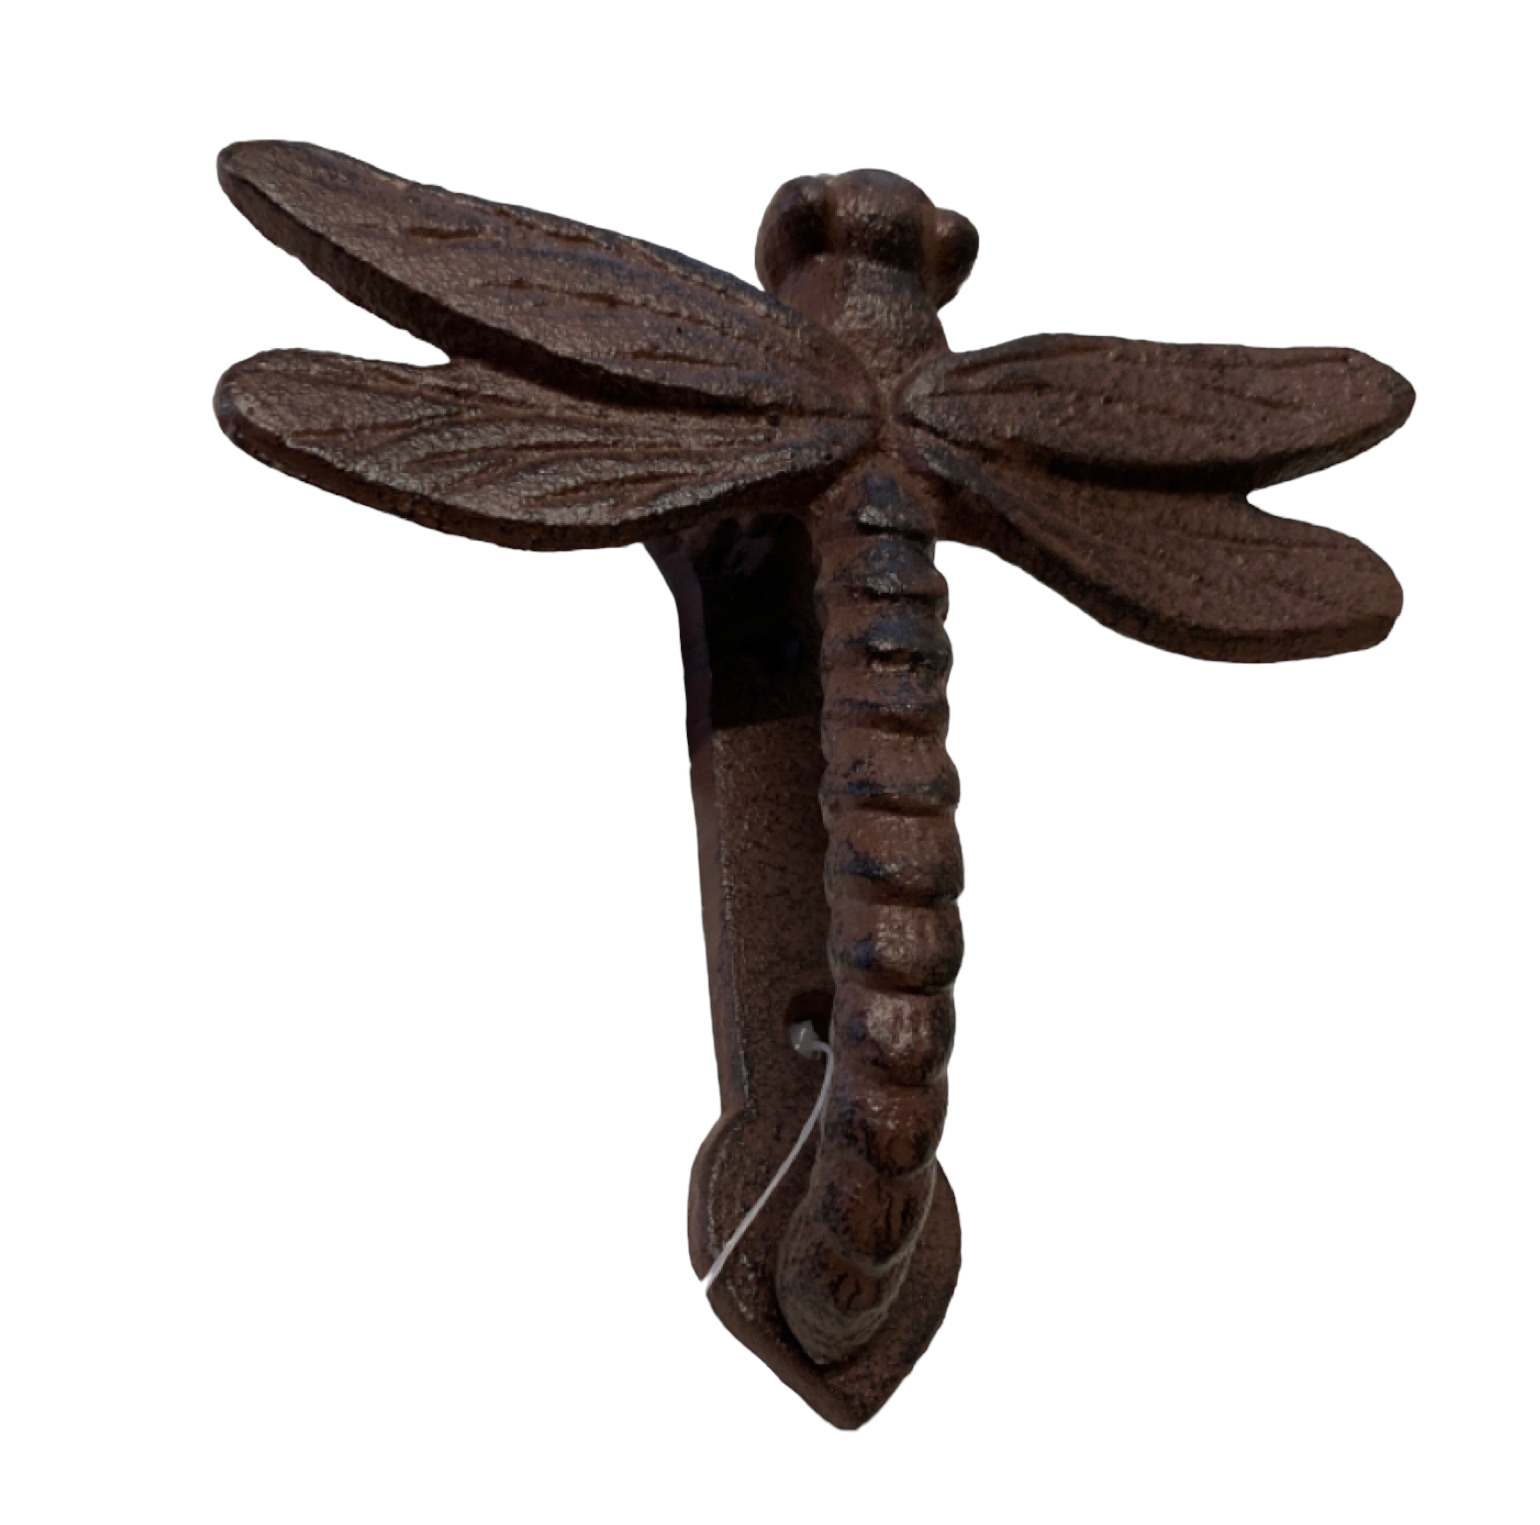 Dragonfly Cast Iron Door Knocker - The Renmy Store Homewares & Gifts 